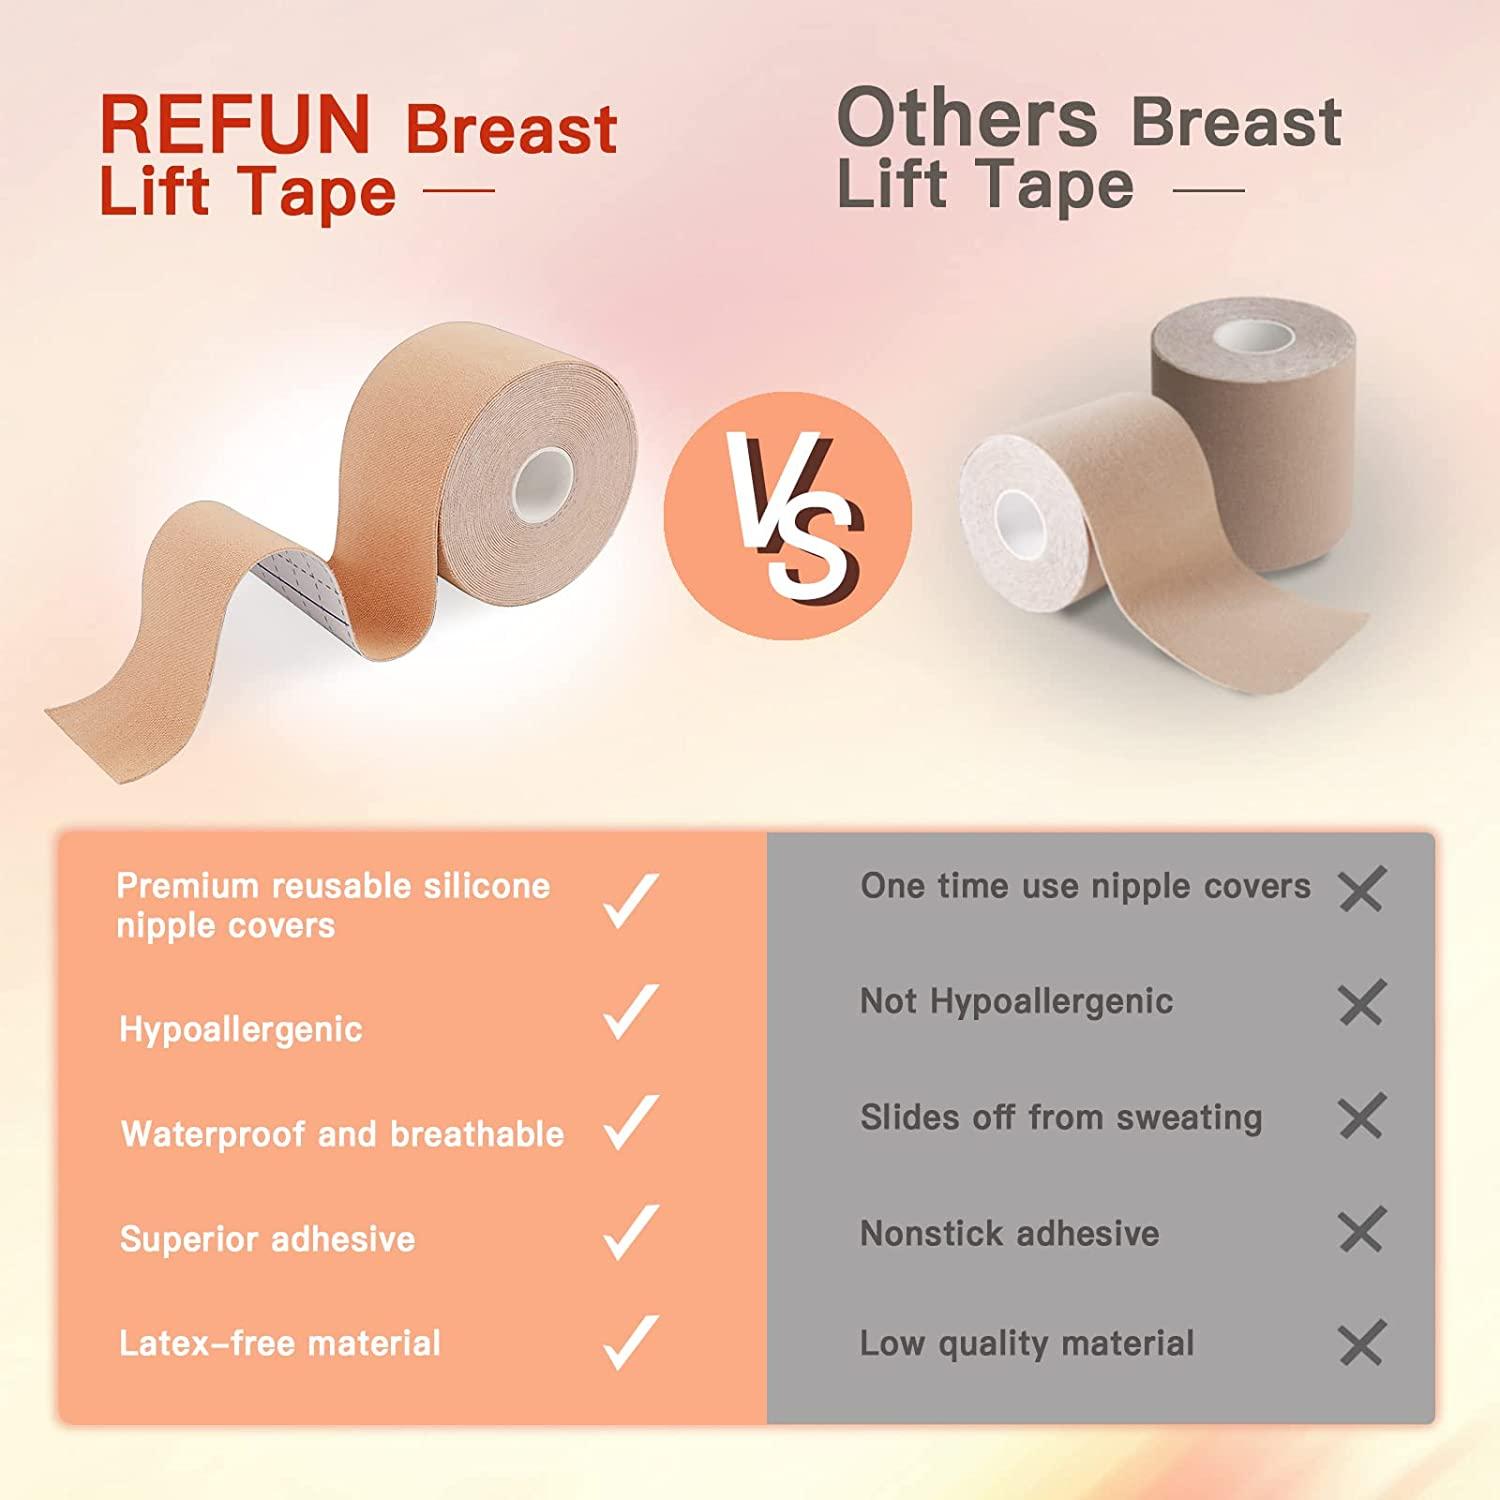  Boob Tape, Body Tape for Breast Lift with 2 Pcs